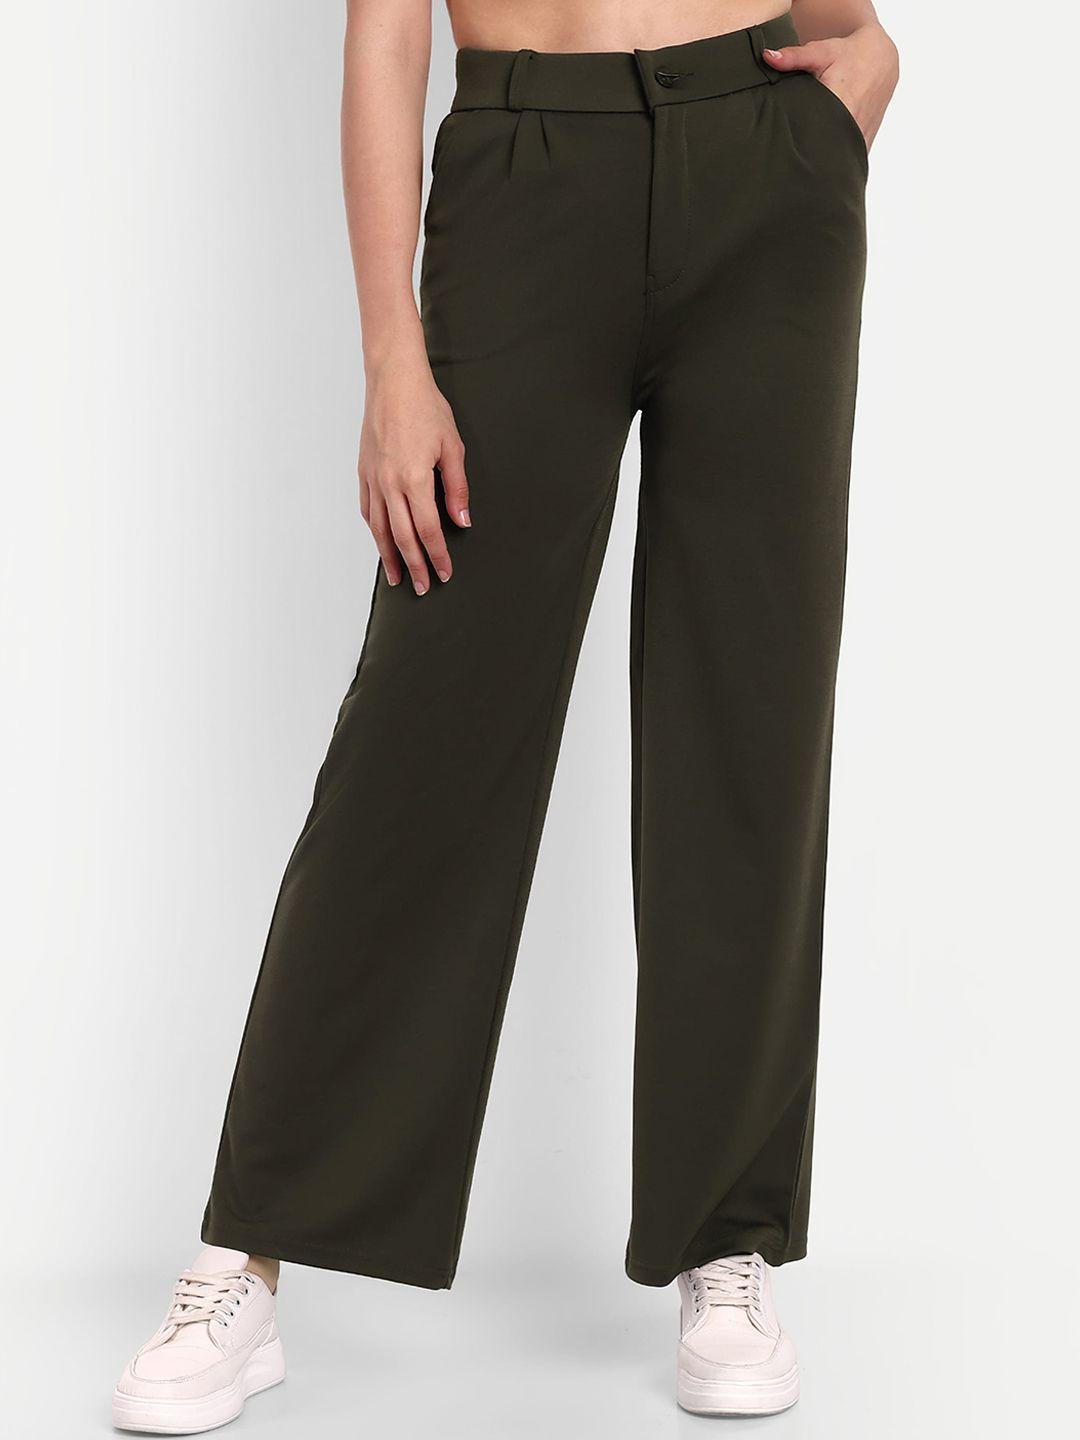 next-one-women-olive-green-smart-loose-fit-high-rise-easy-wash-trousers